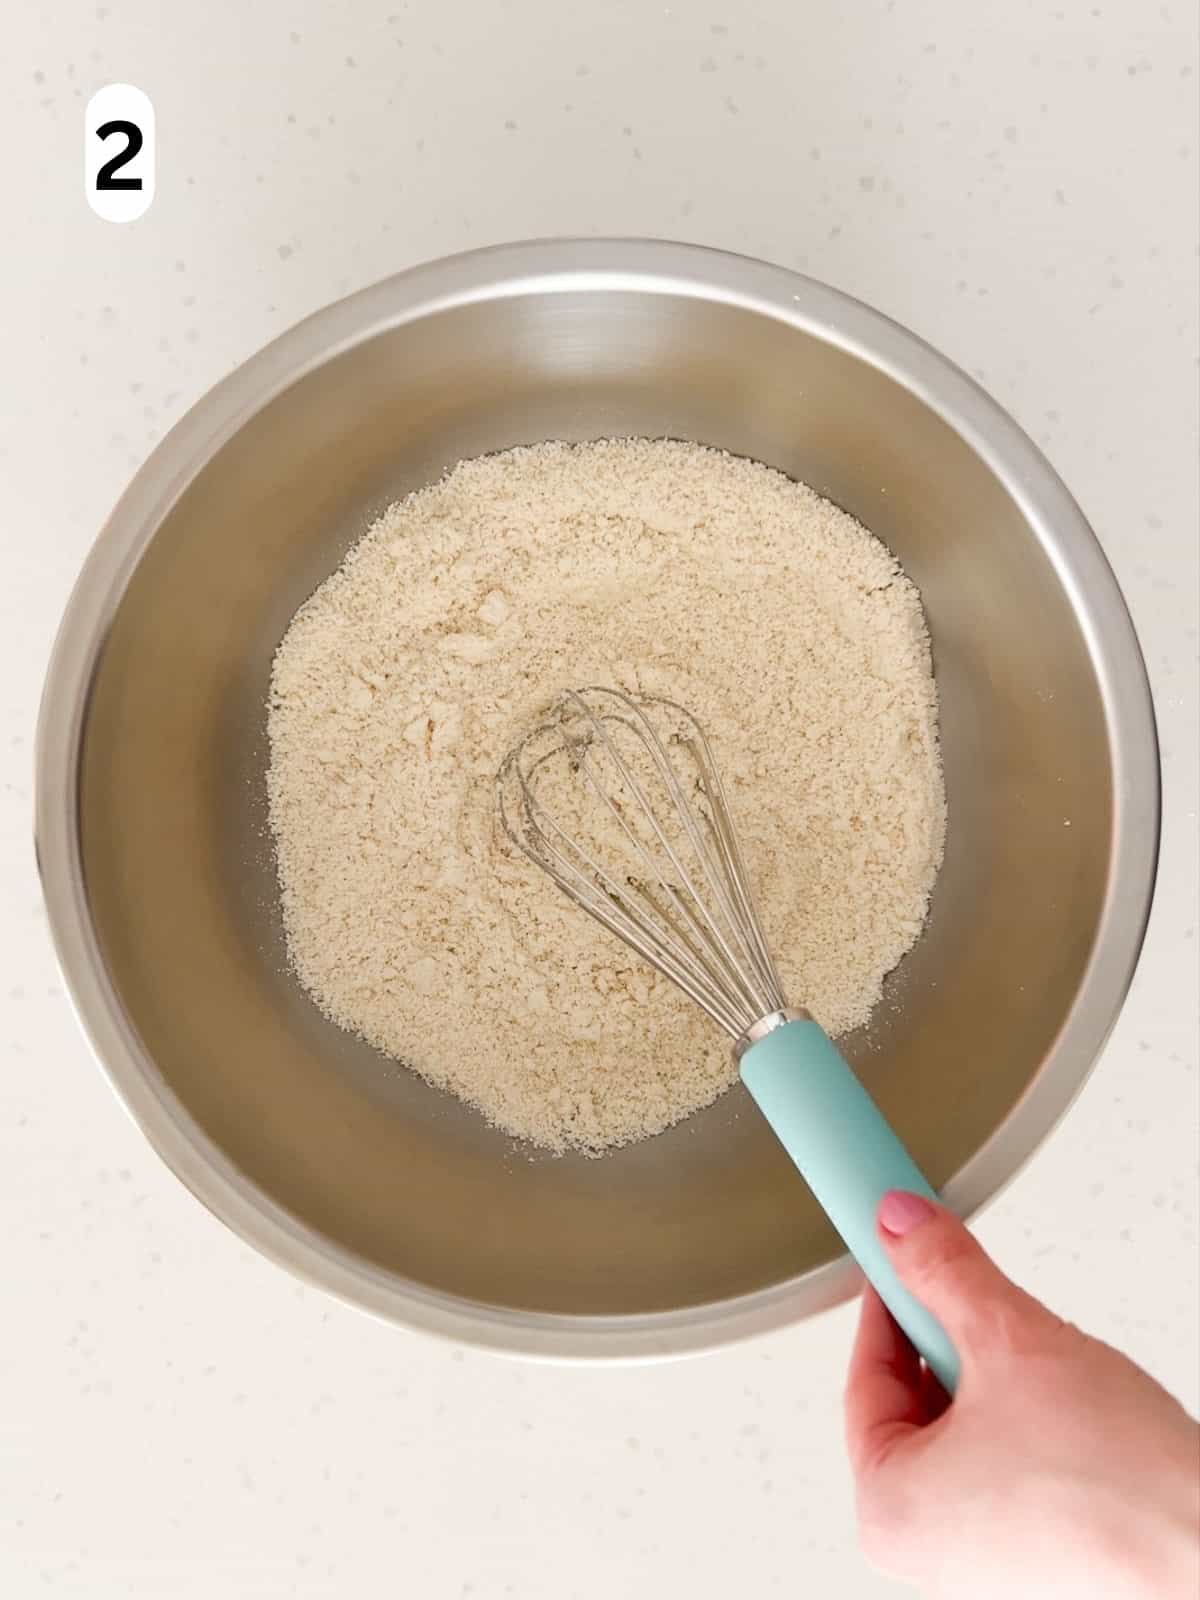 Almond flour, all purpose flour, baking powder, and salt are whisked together.